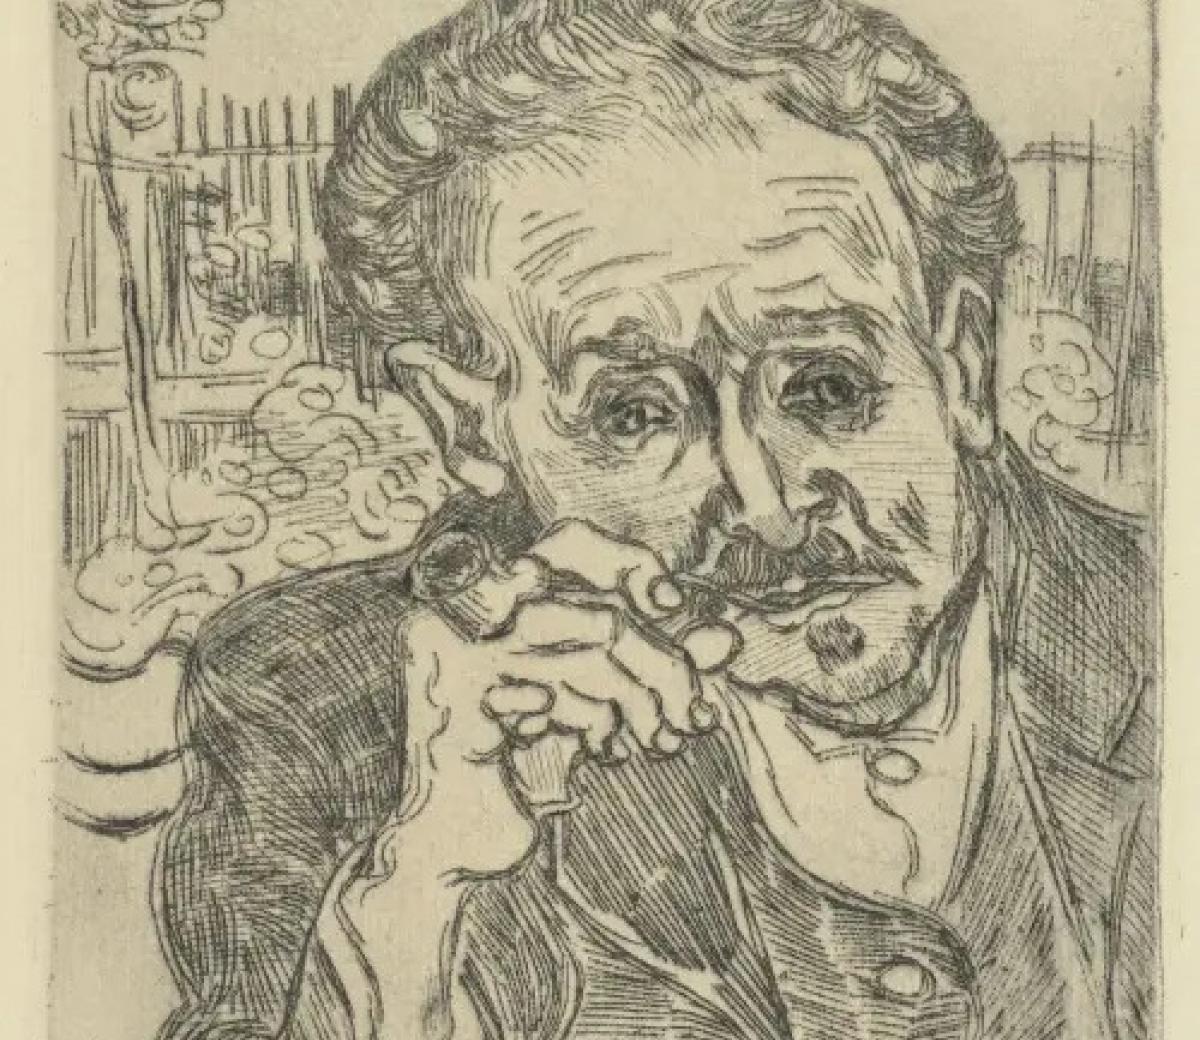 On 25 May van Gogh was initiated by Dr. Gachet with whom he engraved a plate and printed a few copies of L’Homme à la pipe, a portrait of Dr. Gachet which is Van Gogh’s only etching